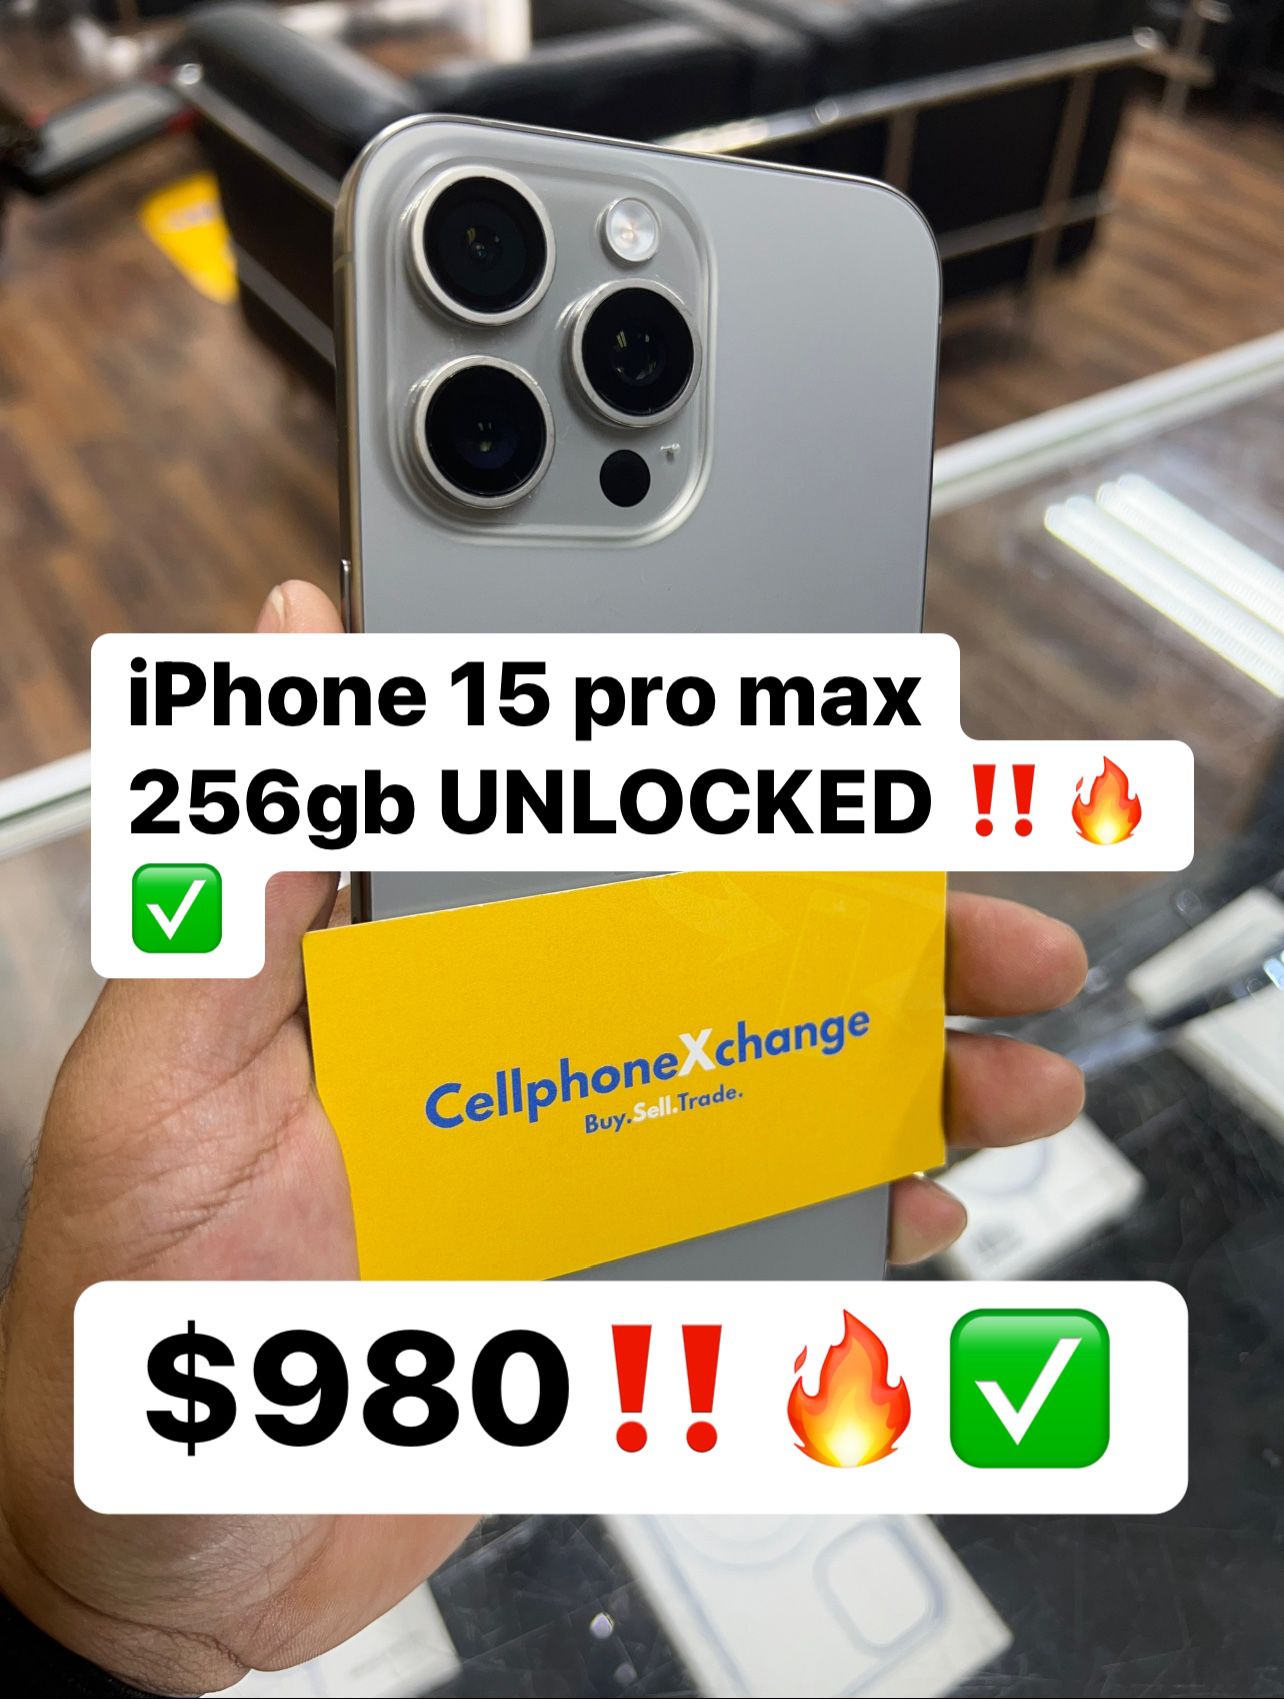 iPhone 15 Pro Max 256gb UNLOCKED SPECIAL 